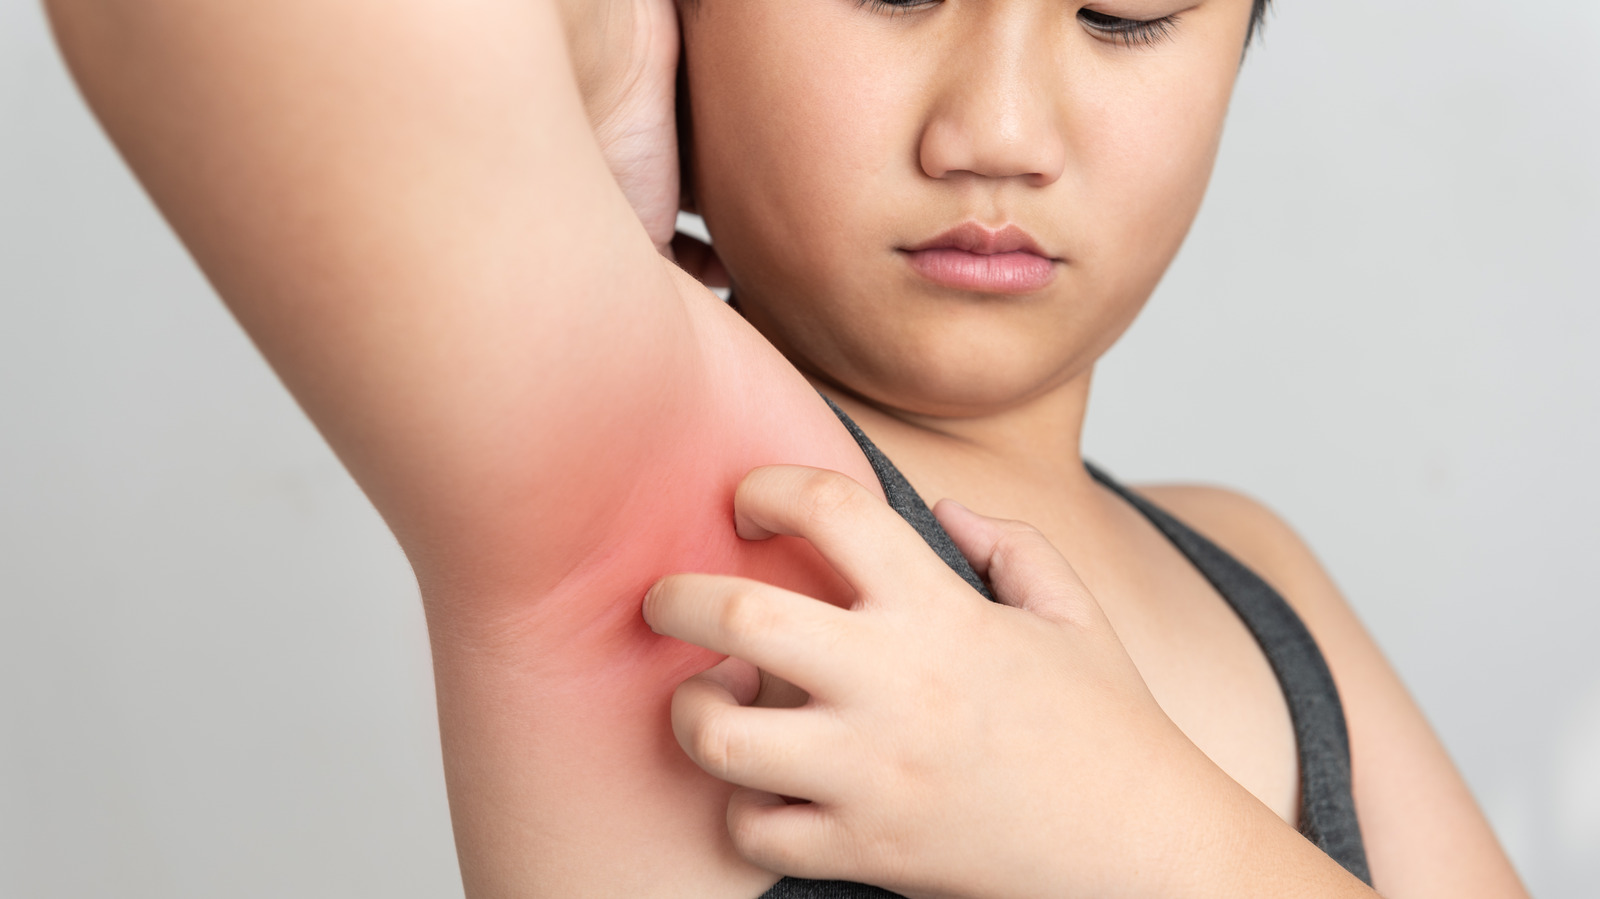 You may have allergic contactdermatitis in your armpits